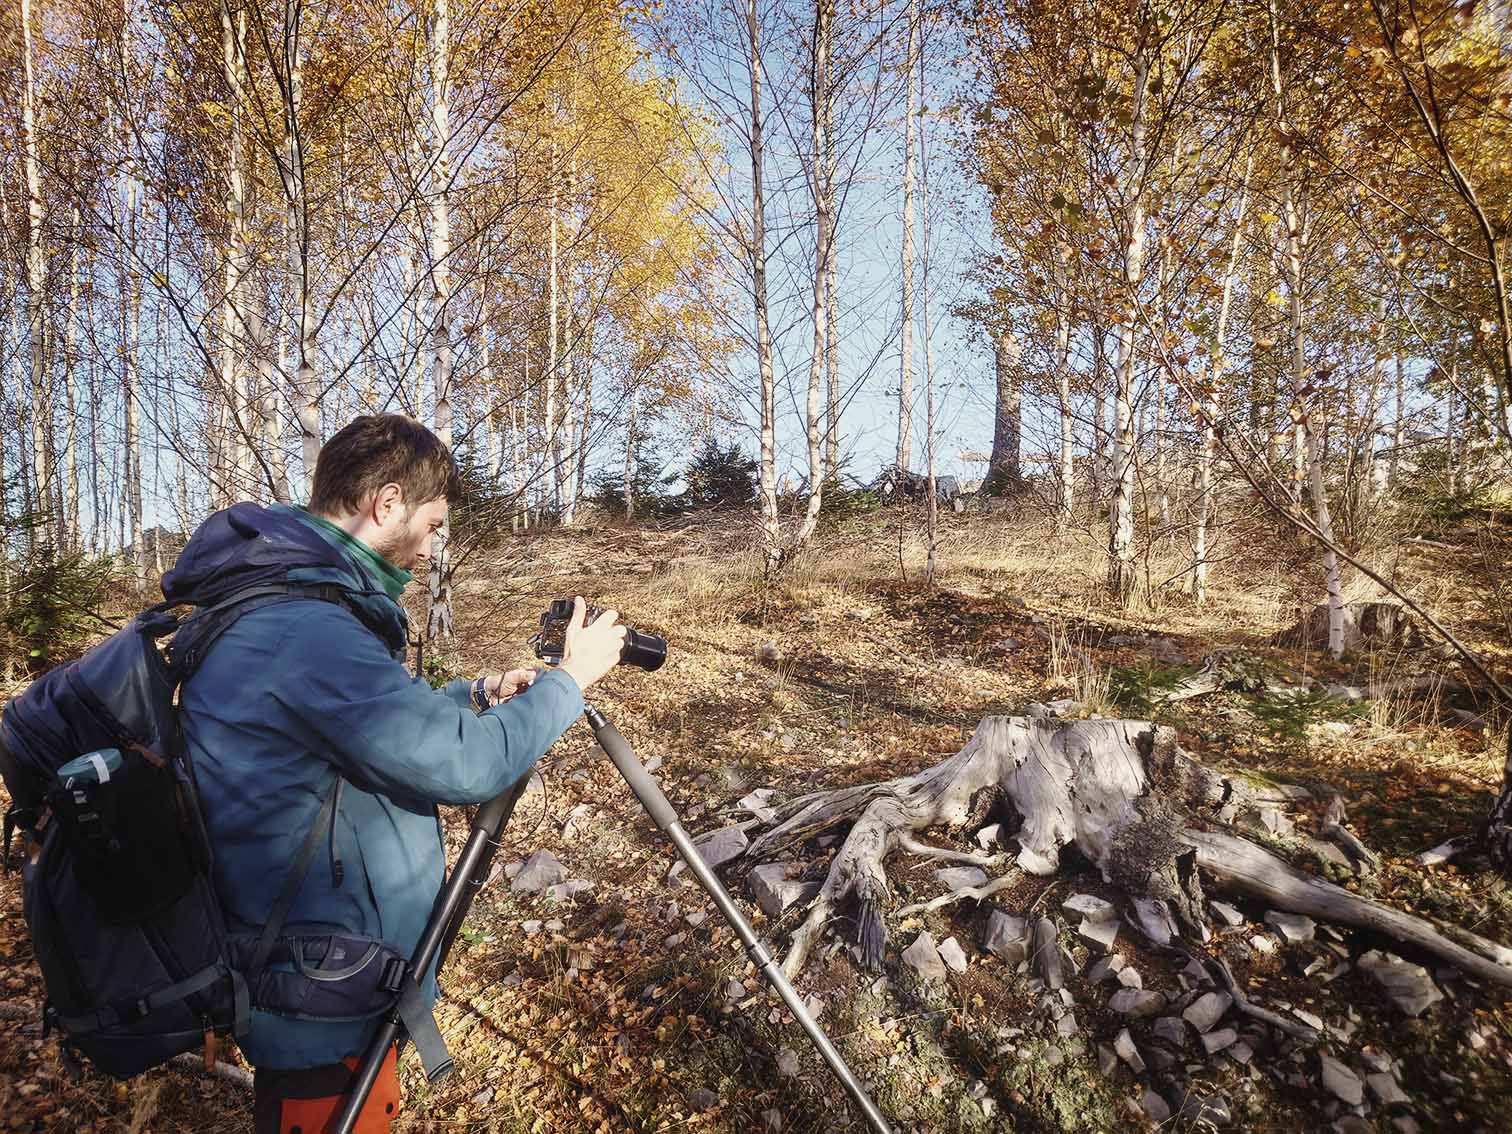 Me making a photo of a dead tree